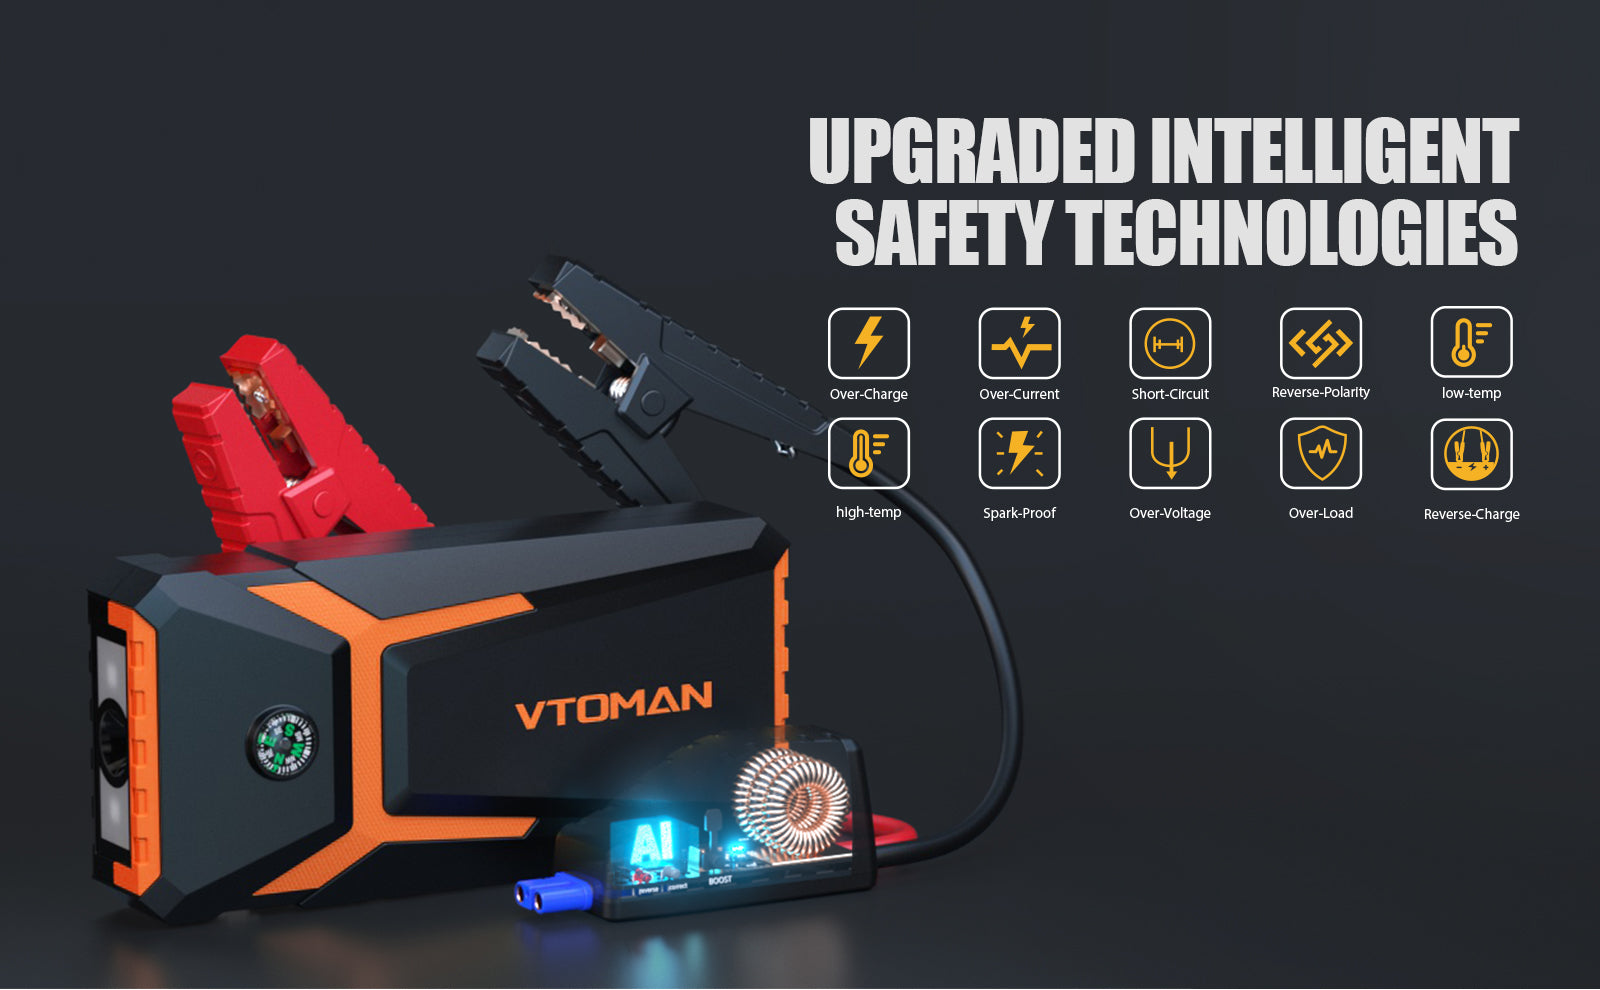 VTOMAN V8 Pro car battery jump starter pack prioritizes safety and ease of use